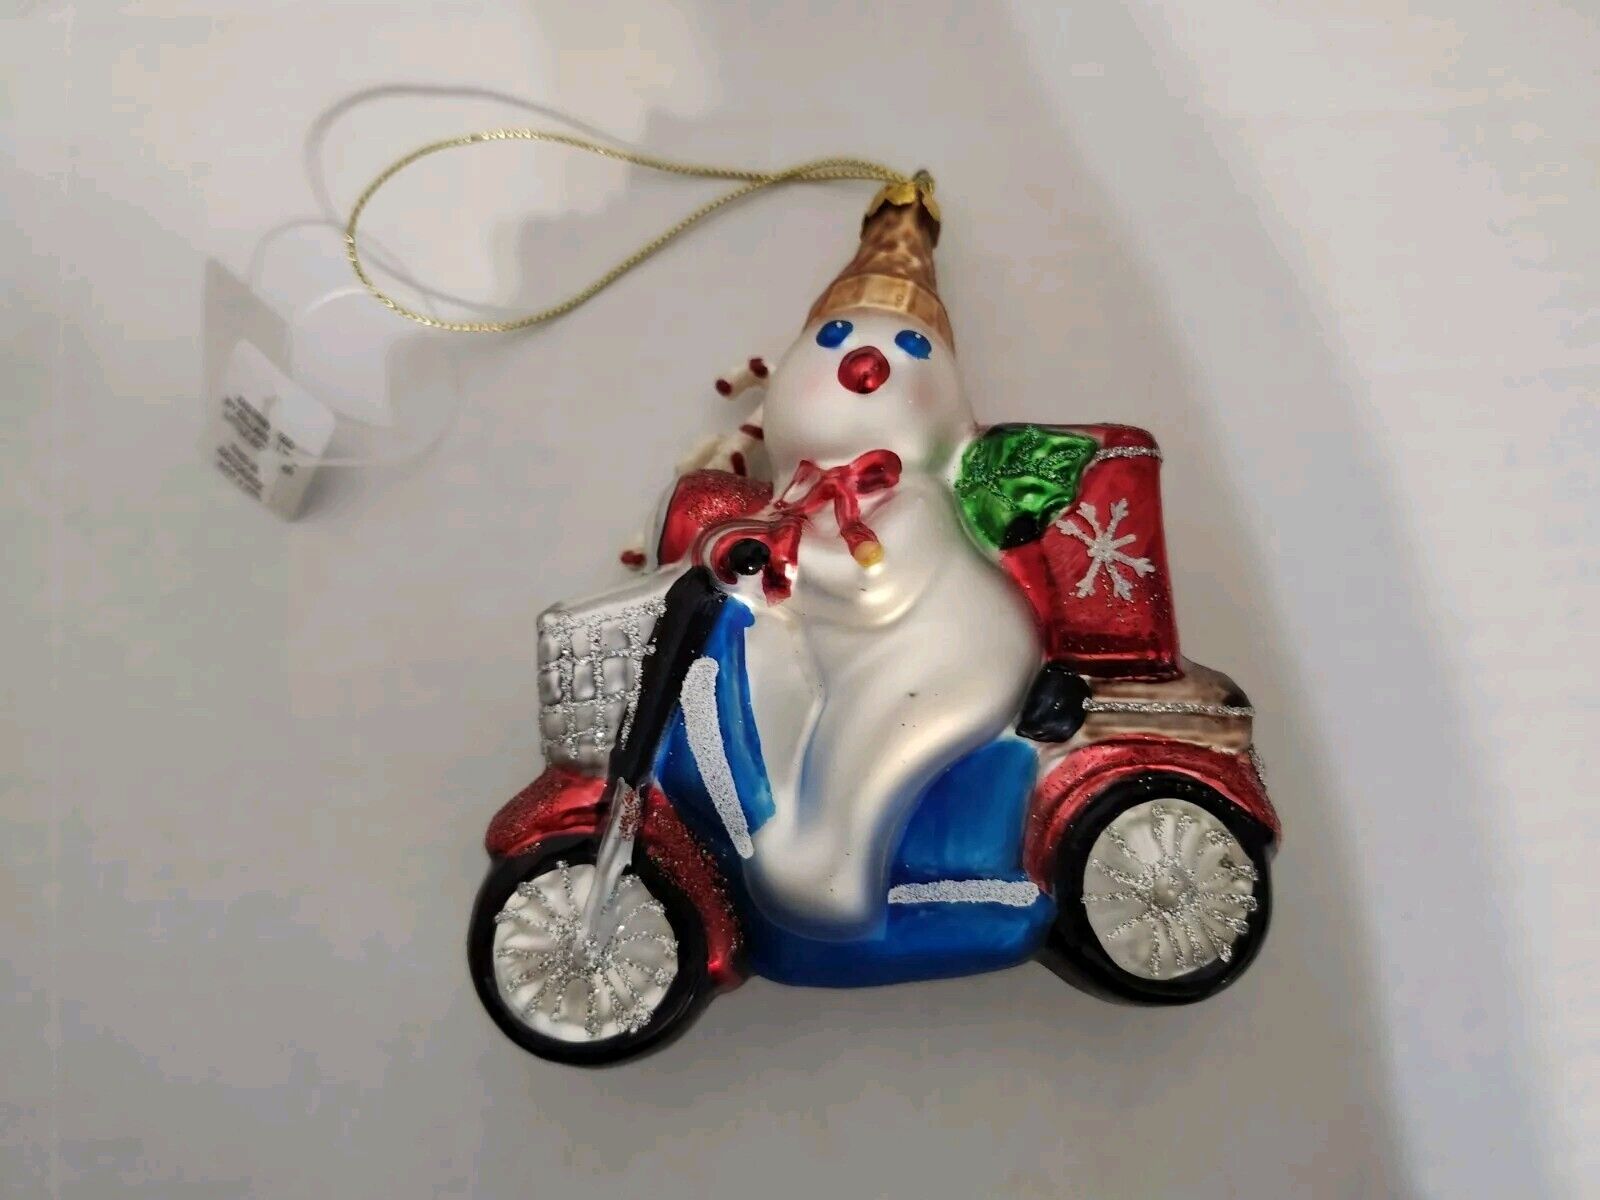 MR. BINGLE On Motorcycle Glass Christmas Ornament snowman NEW FROM DILLARDS 